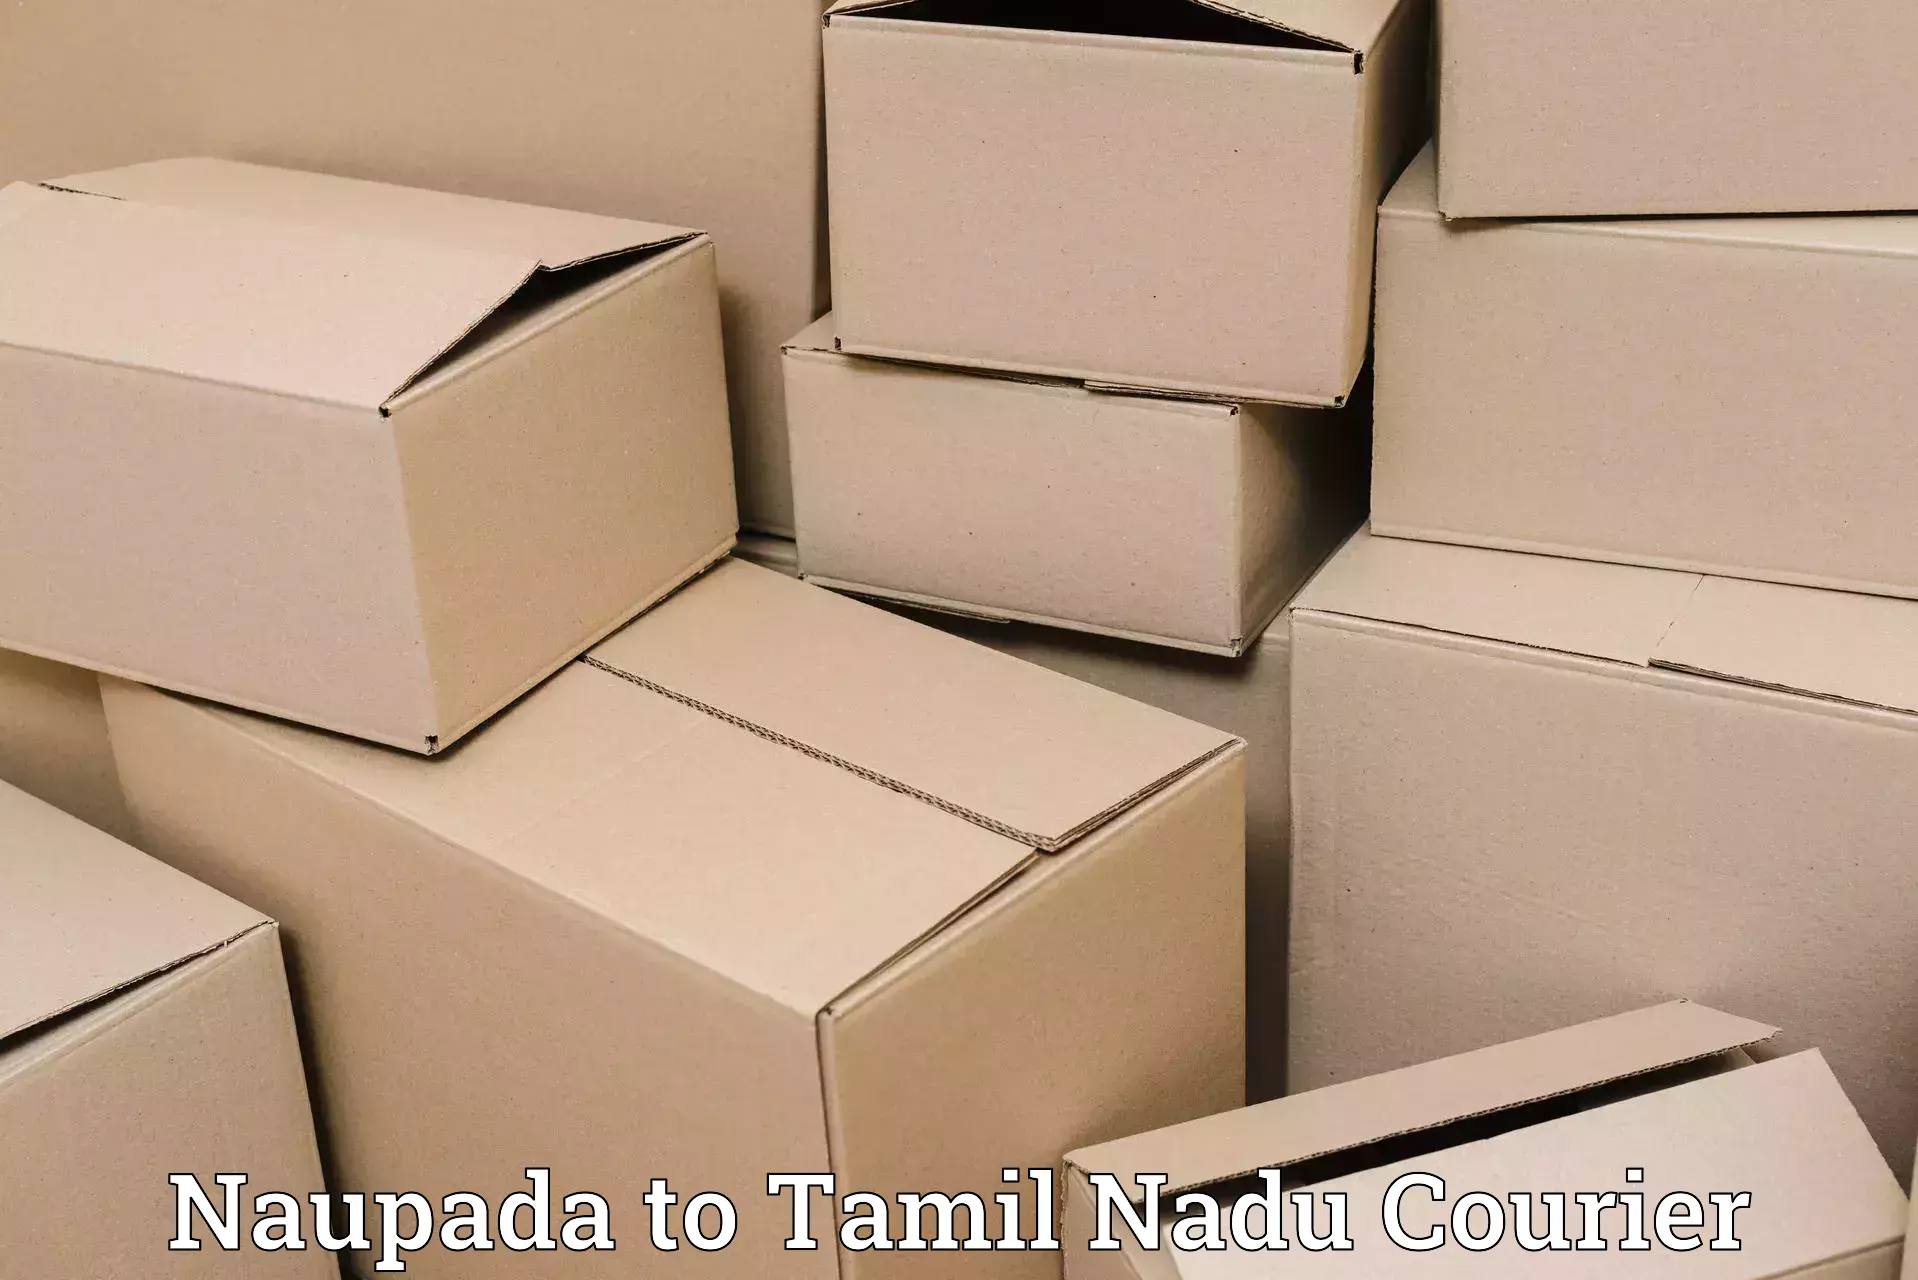 Flexible delivery scheduling Naupada to Tuticorin Port